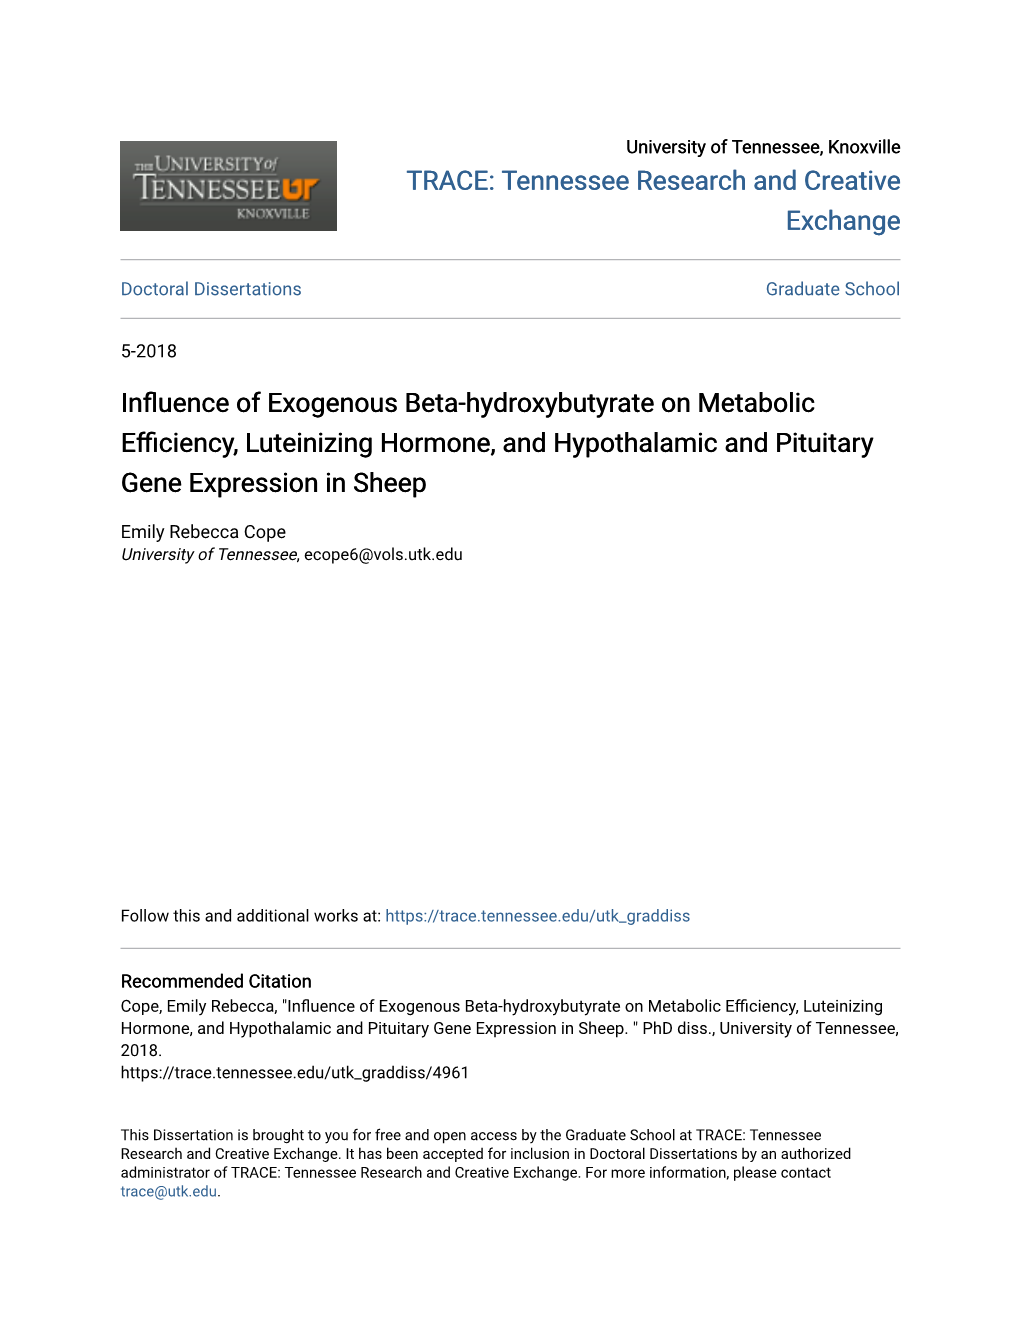 Influence of Exogenous Beta-Hydroxybutyrate on Metabolic Efficiency, Luteinizing Hormone, and Hypothalamic and Pituitary Gene Expression in Sheep